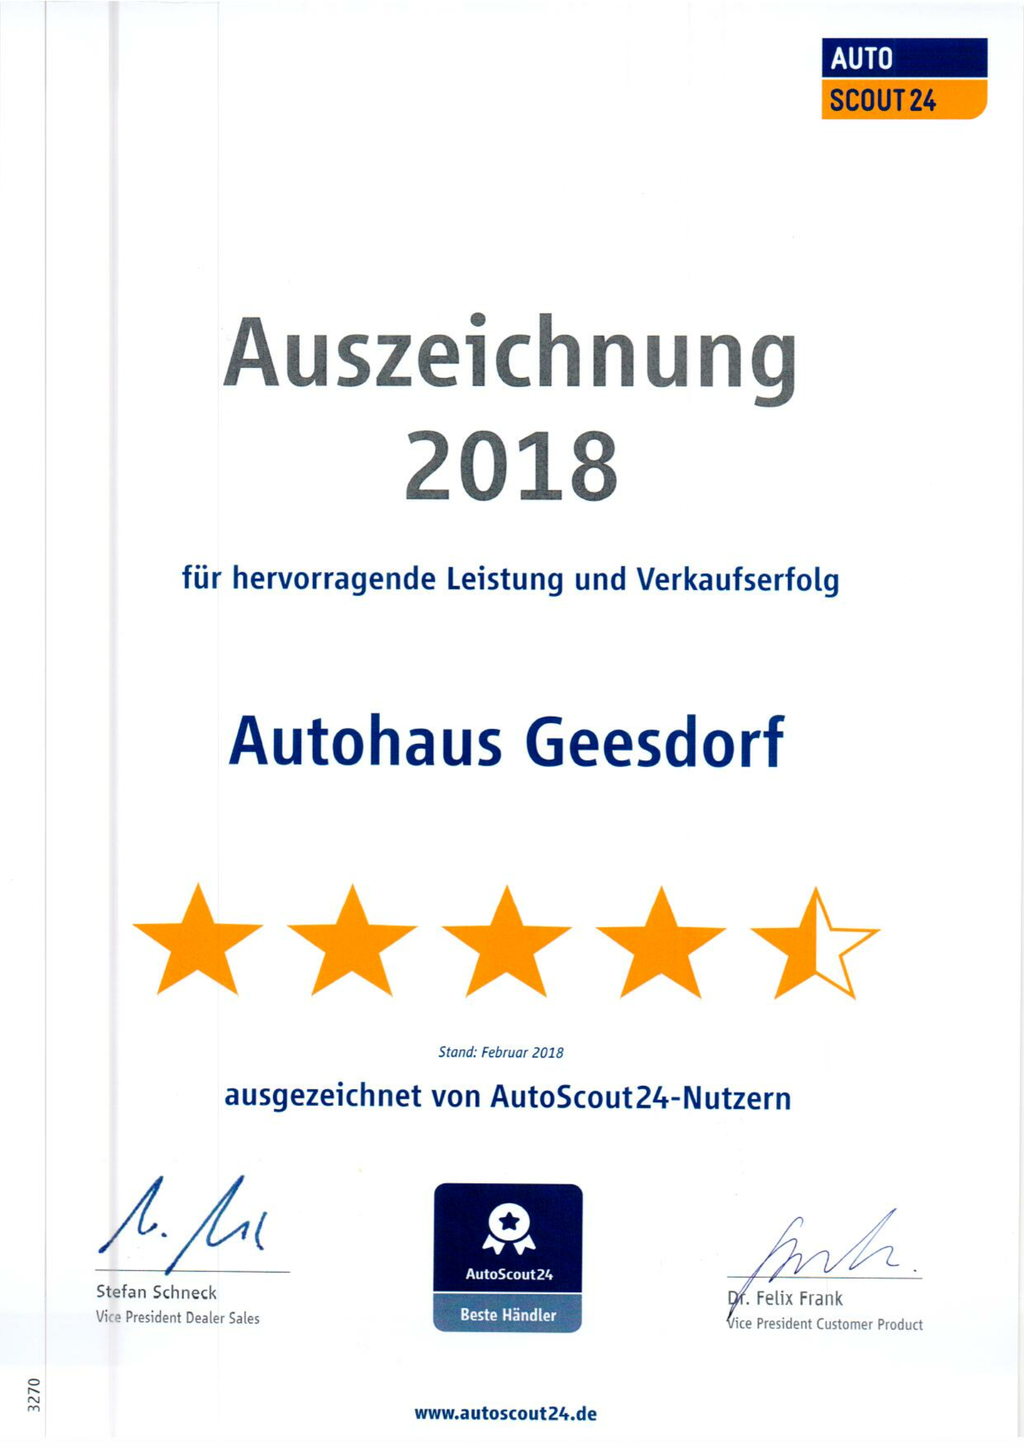 Auto scout germany